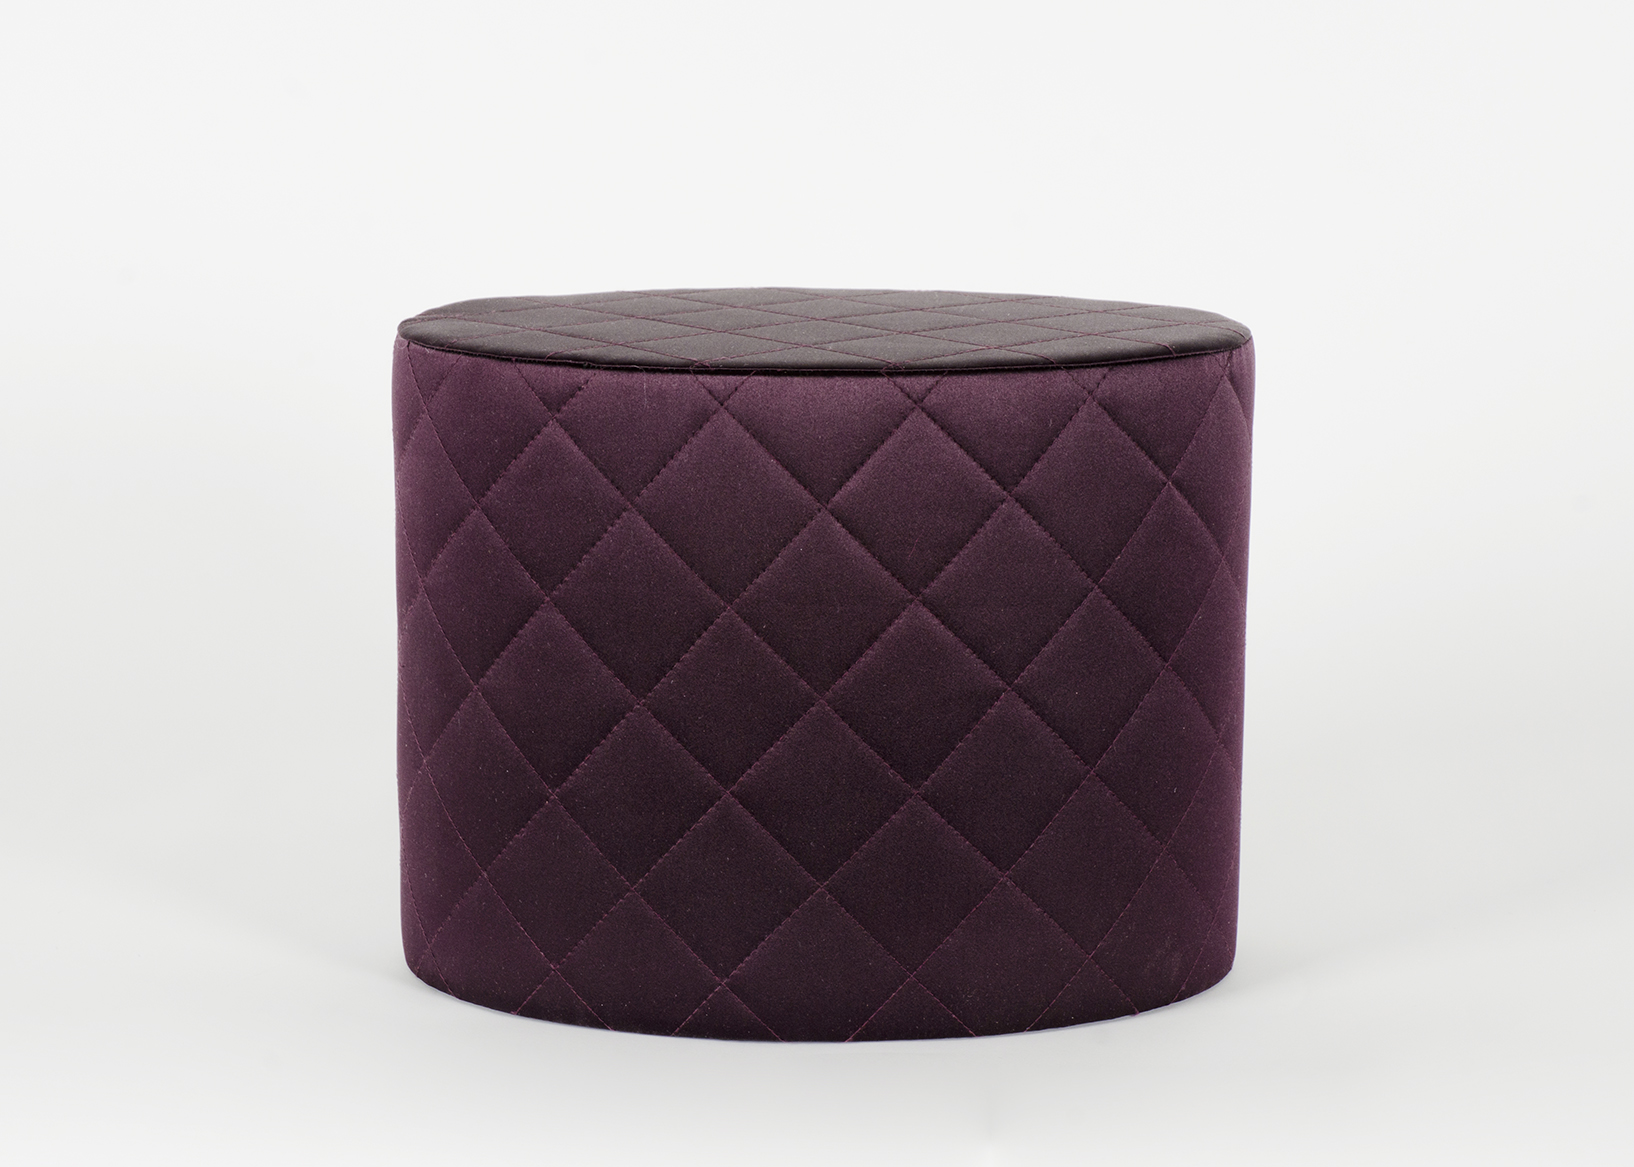 11" TABLE RISER - QUILTED SATIN BLACK CHERRY